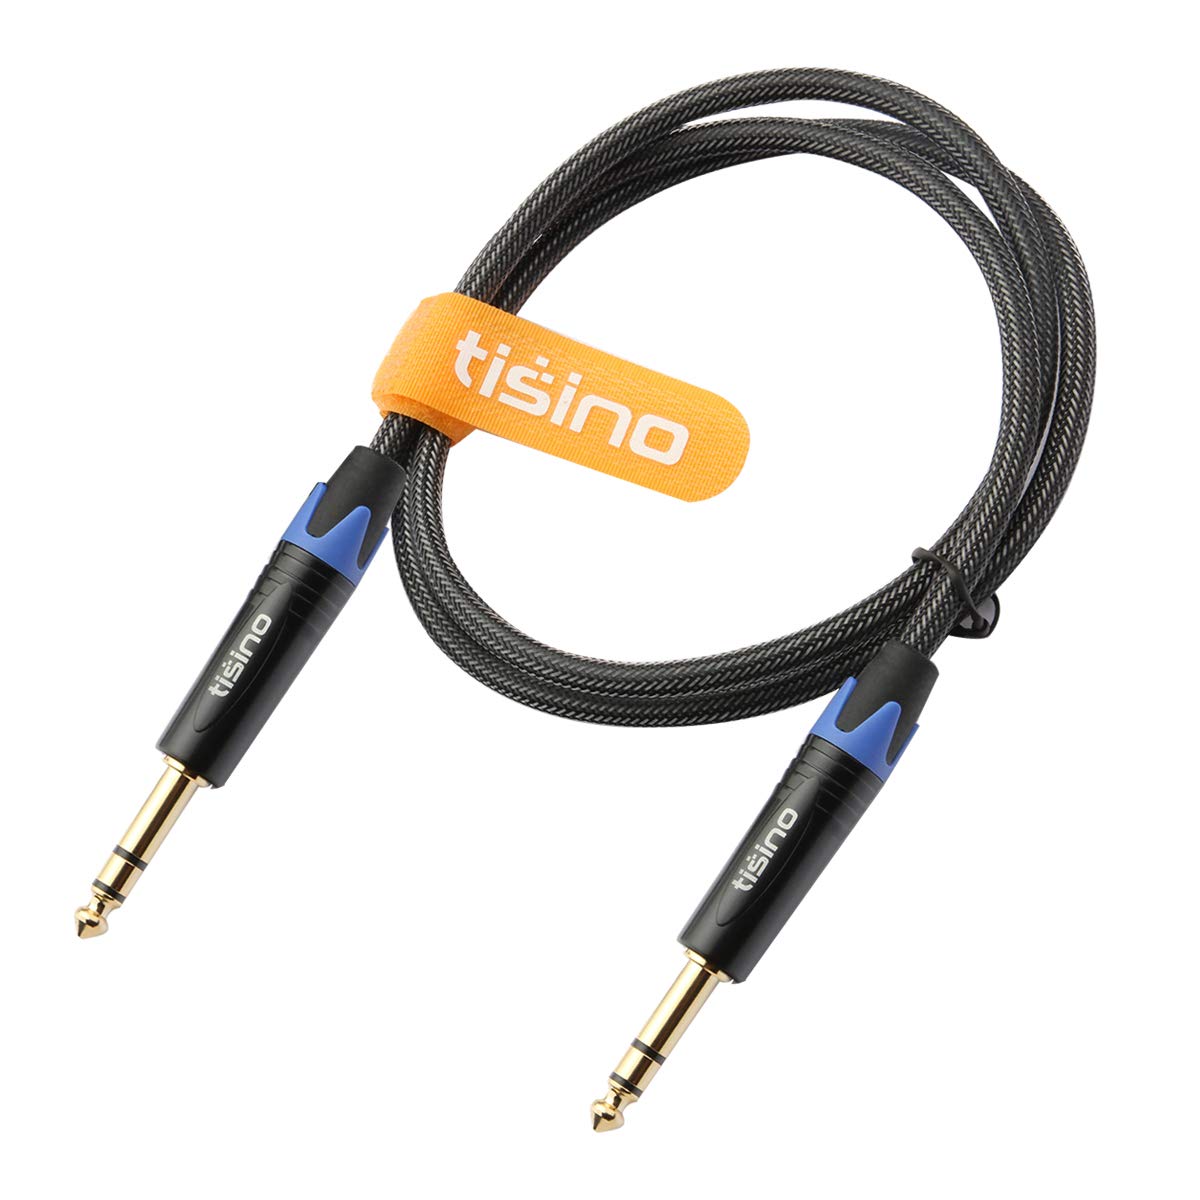 tisino 1/4 inch TRS Cable, Quarter inch 1/4 TRS to TRS Balanced Stereo Audio Cable Male to Male Pro Interconnect Cable, Nylon Braid - 6 FT